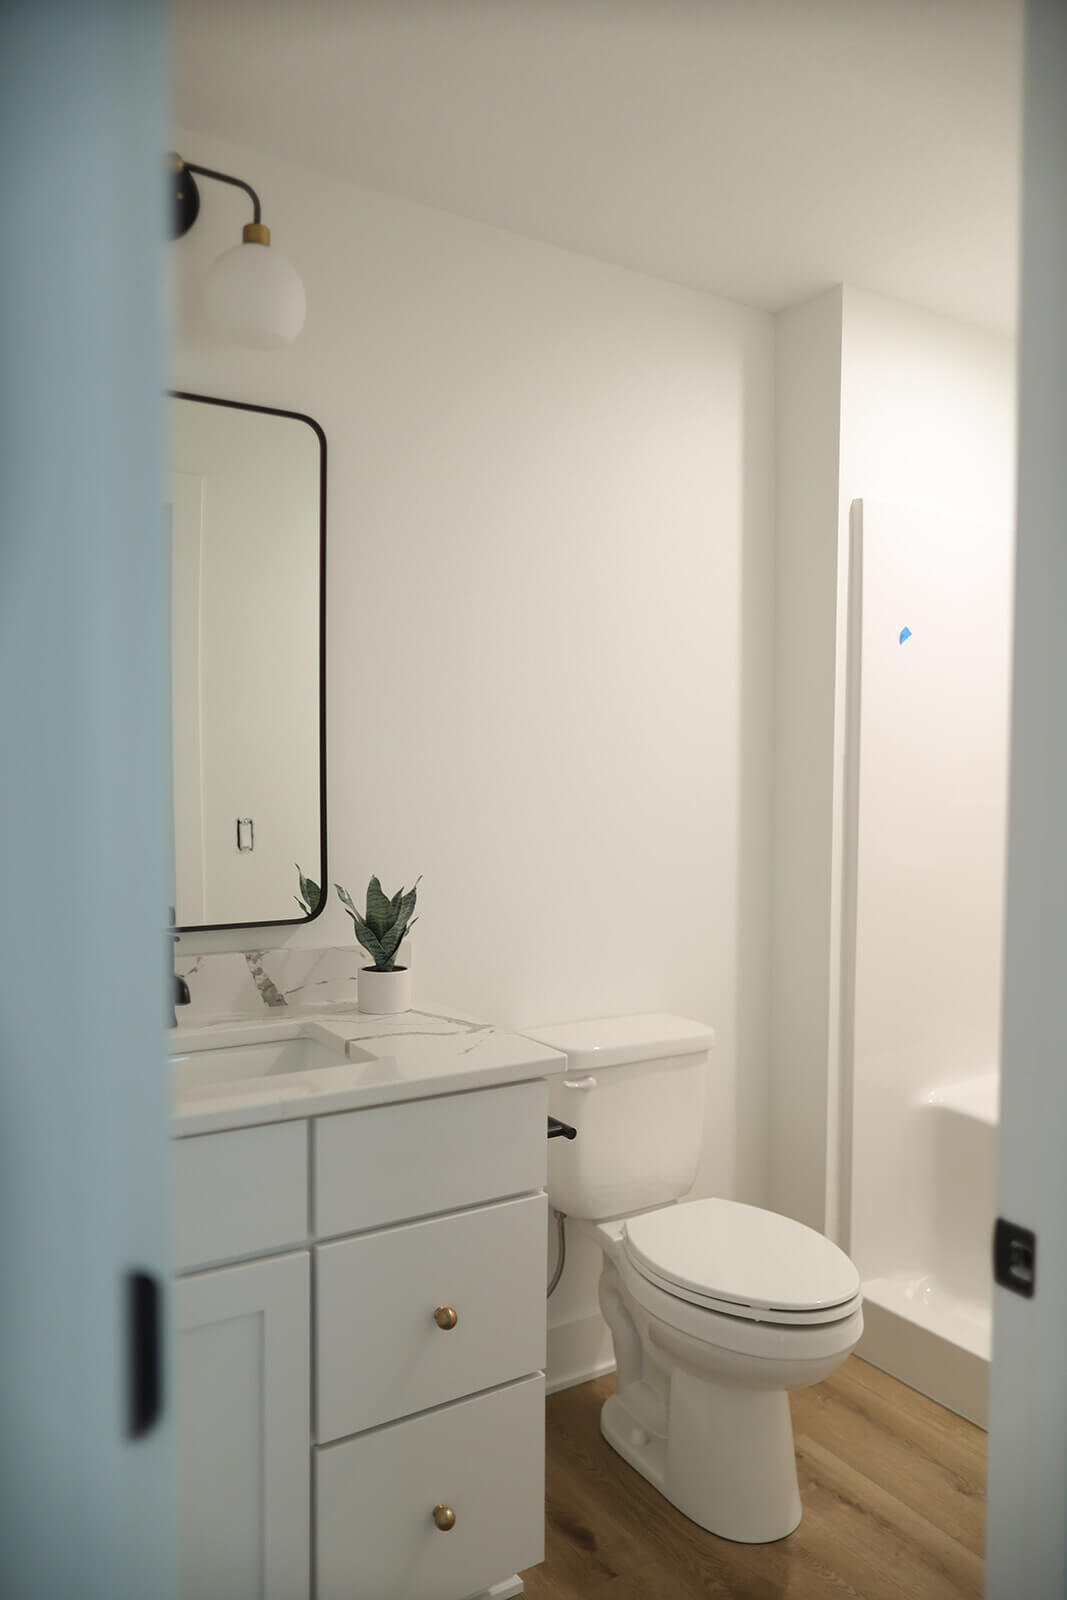 4758-Panorama-Drive-Bathroom-Interior-Design-Grimes-Des-Moines-Waukee-West-Des-Moines-Ankeny-Lake-Panorama-Central-Iowa--Interior-Design-Grimes-Des-Moines-Waukee-West-Des-Moines-Ankeny-Lake-Panorama-Central-Iowa-3F1A1160